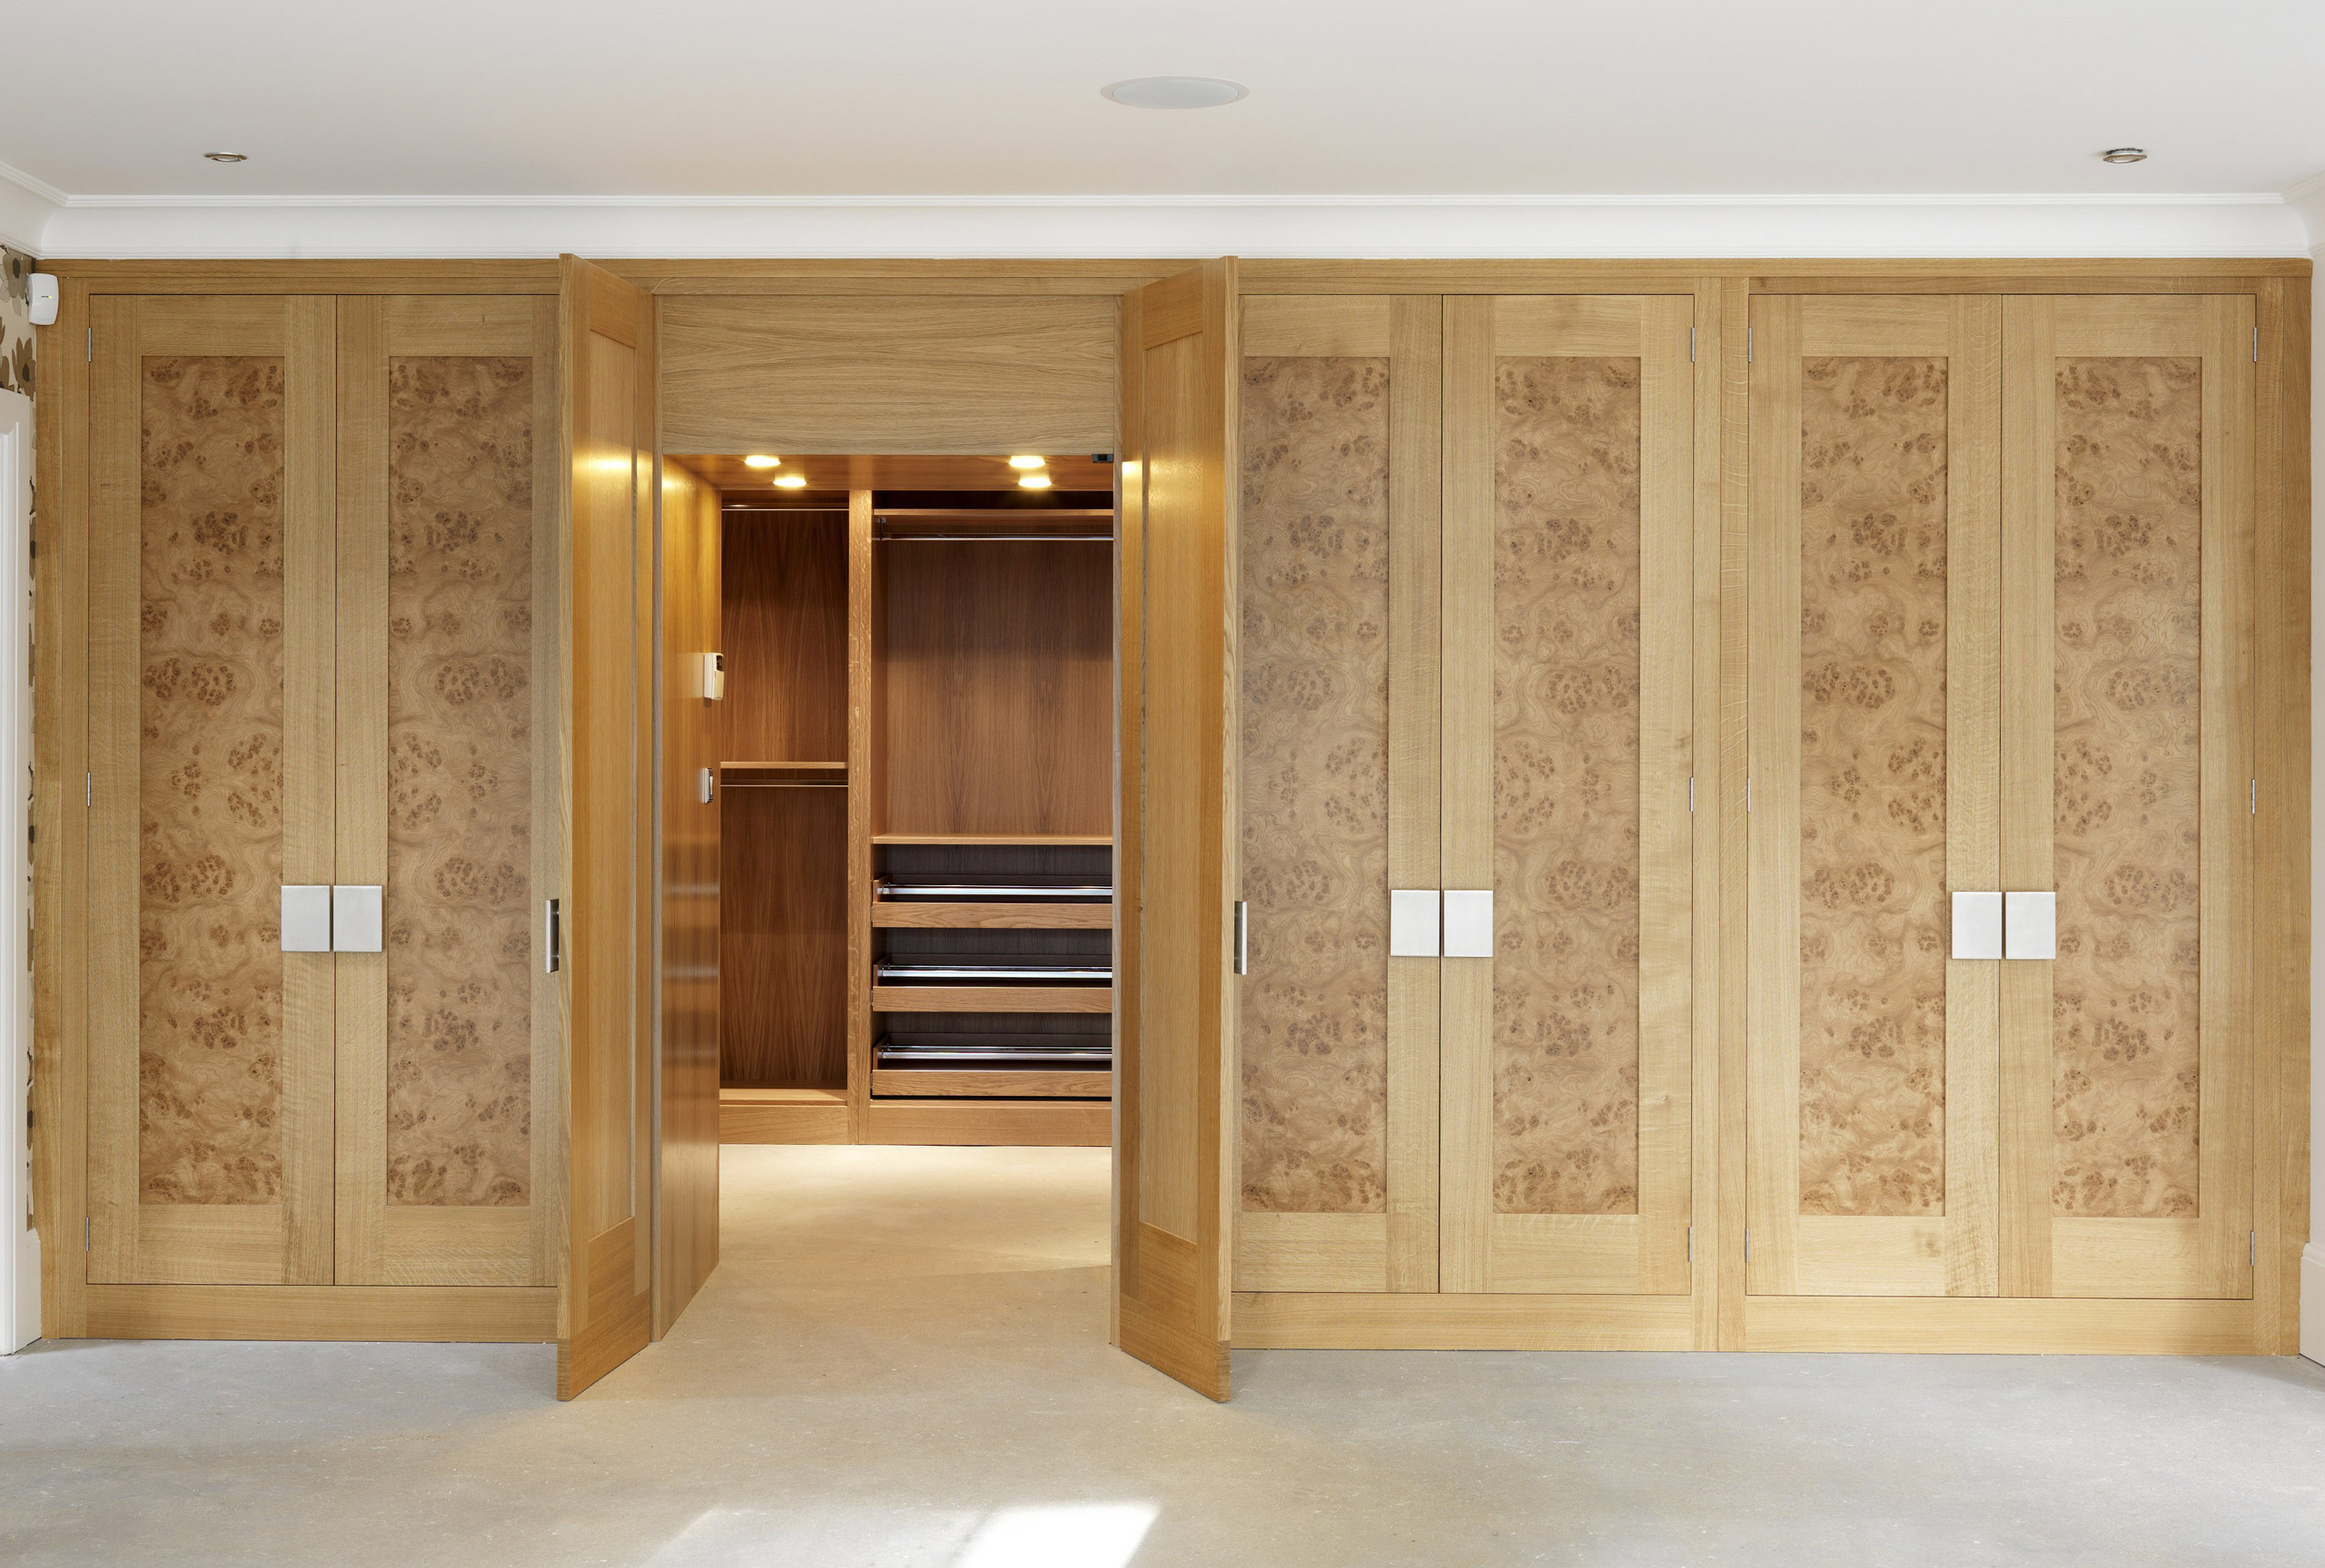 Chamber Furniture  Manufacturers of Walk in Closets